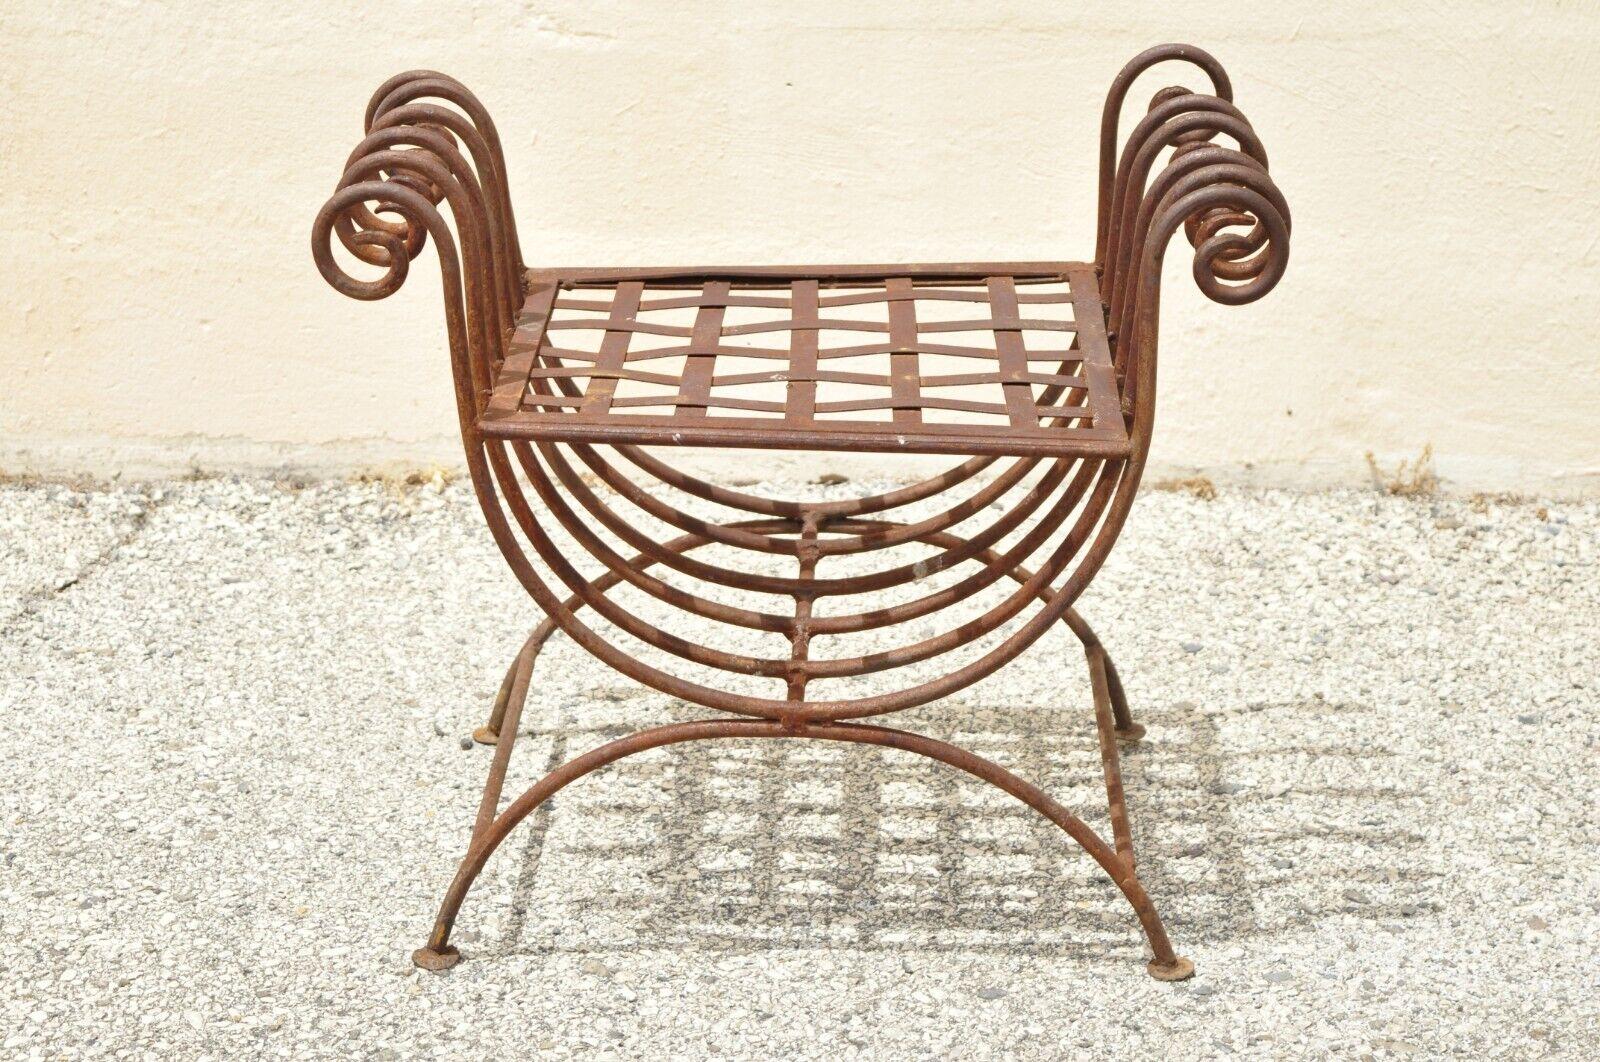 Vintage Wrought Iron Curule Bench Scrolling Rusty Metal Bench X - Frame. Item features scrolling wrought iron frame, curule x-frame design, rusty finish, great style and form. Circa Mid 20th Century. Measurements: 21